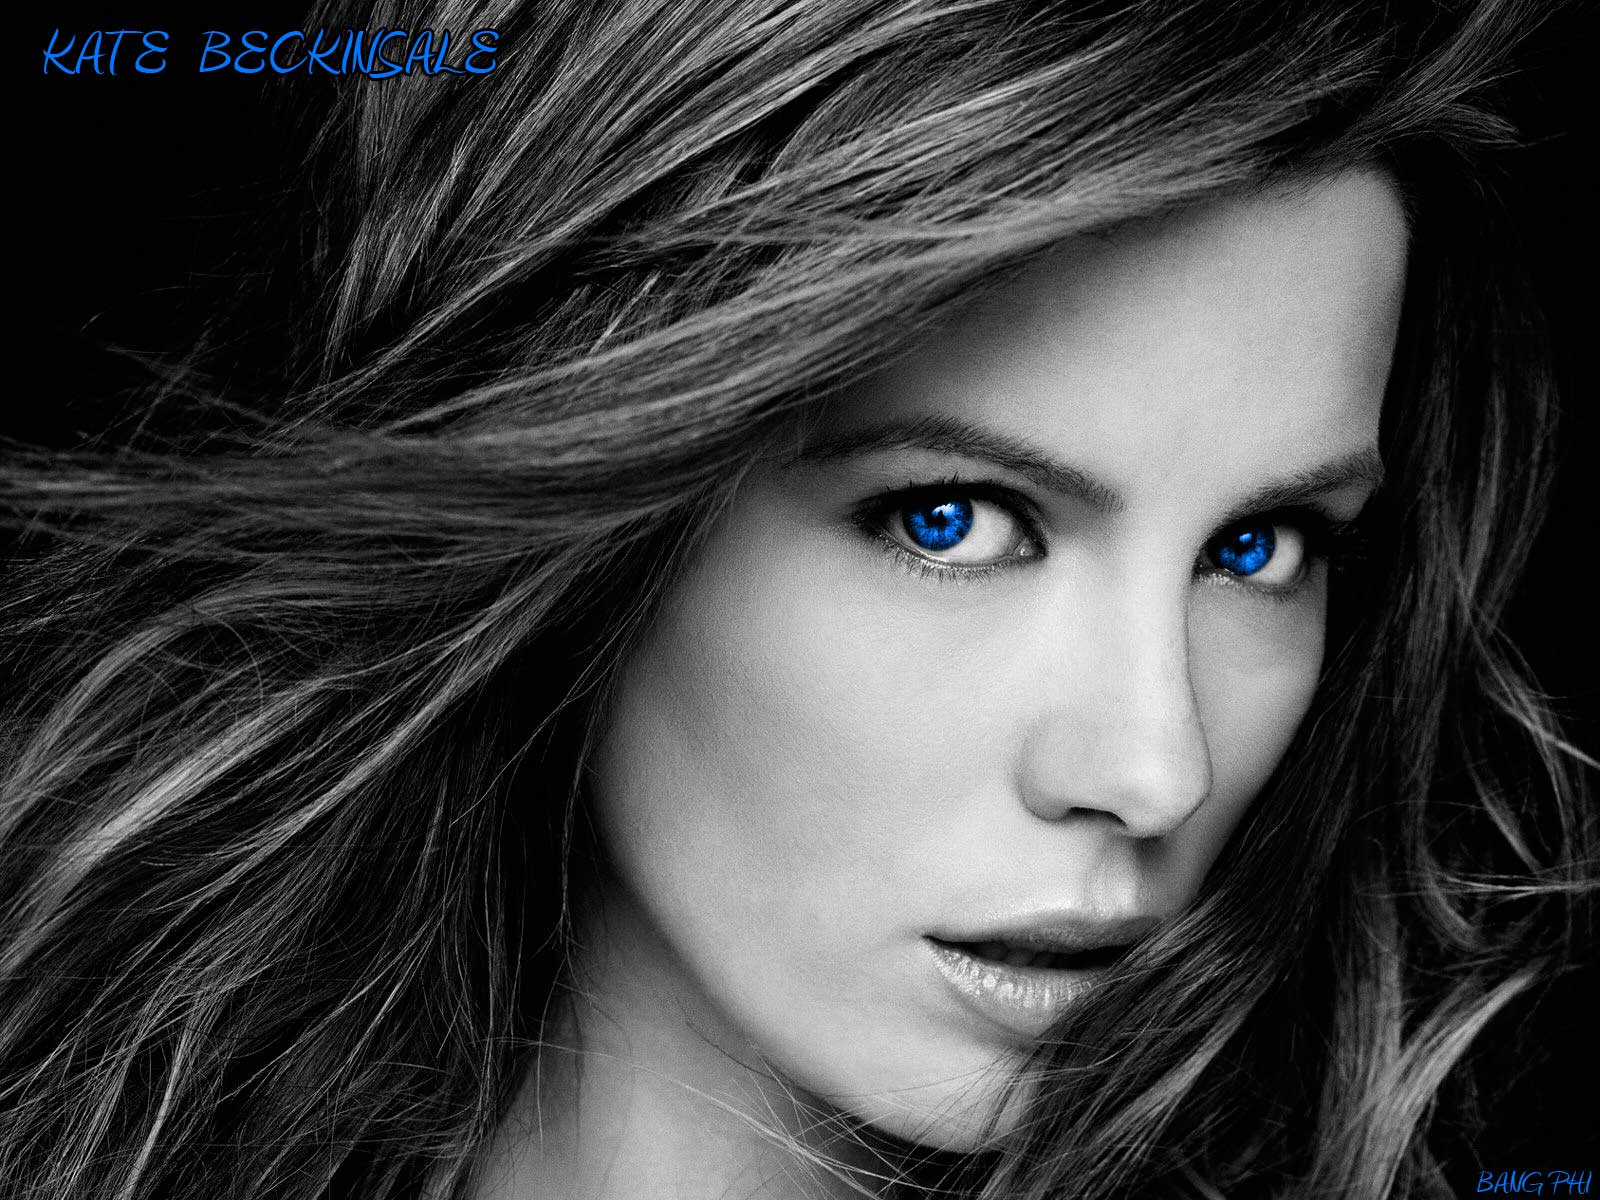 Download High quality Kate Beckinsale wallpaper / Celebrities Female / 1600x1200